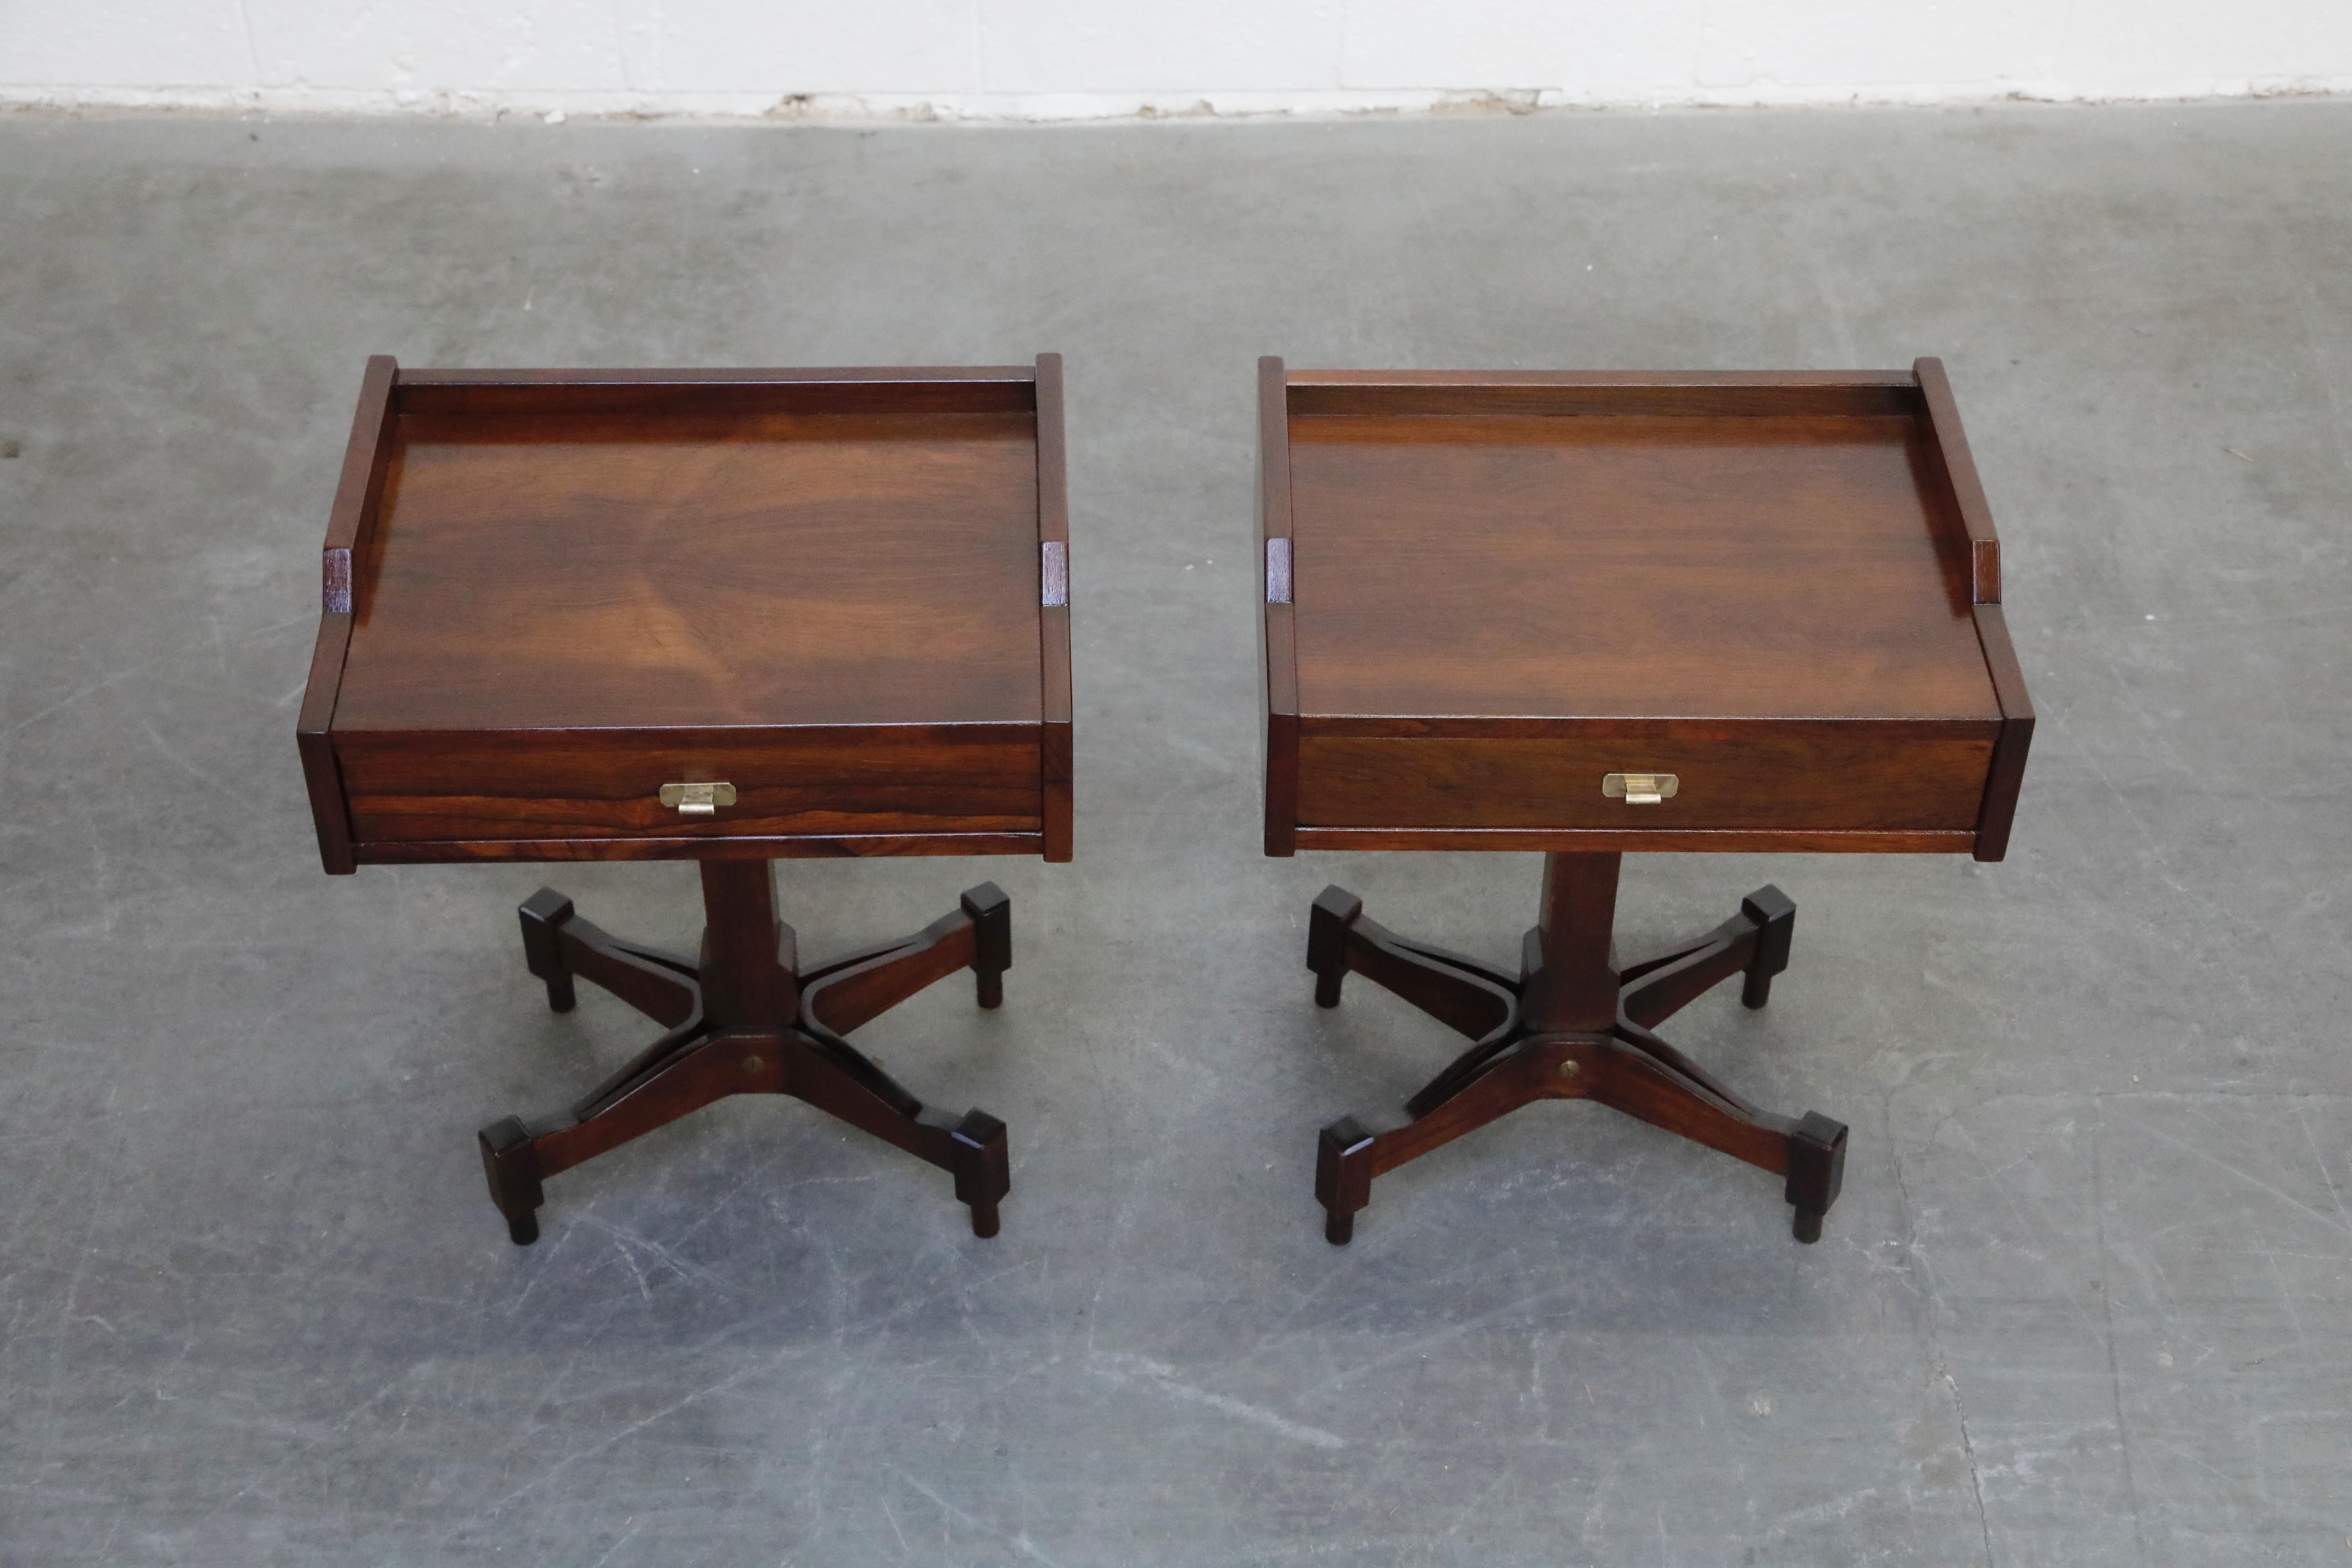 Italian Rosewood Nightstands by Claudio Salocchi for Sormani, Italy, c 1960s